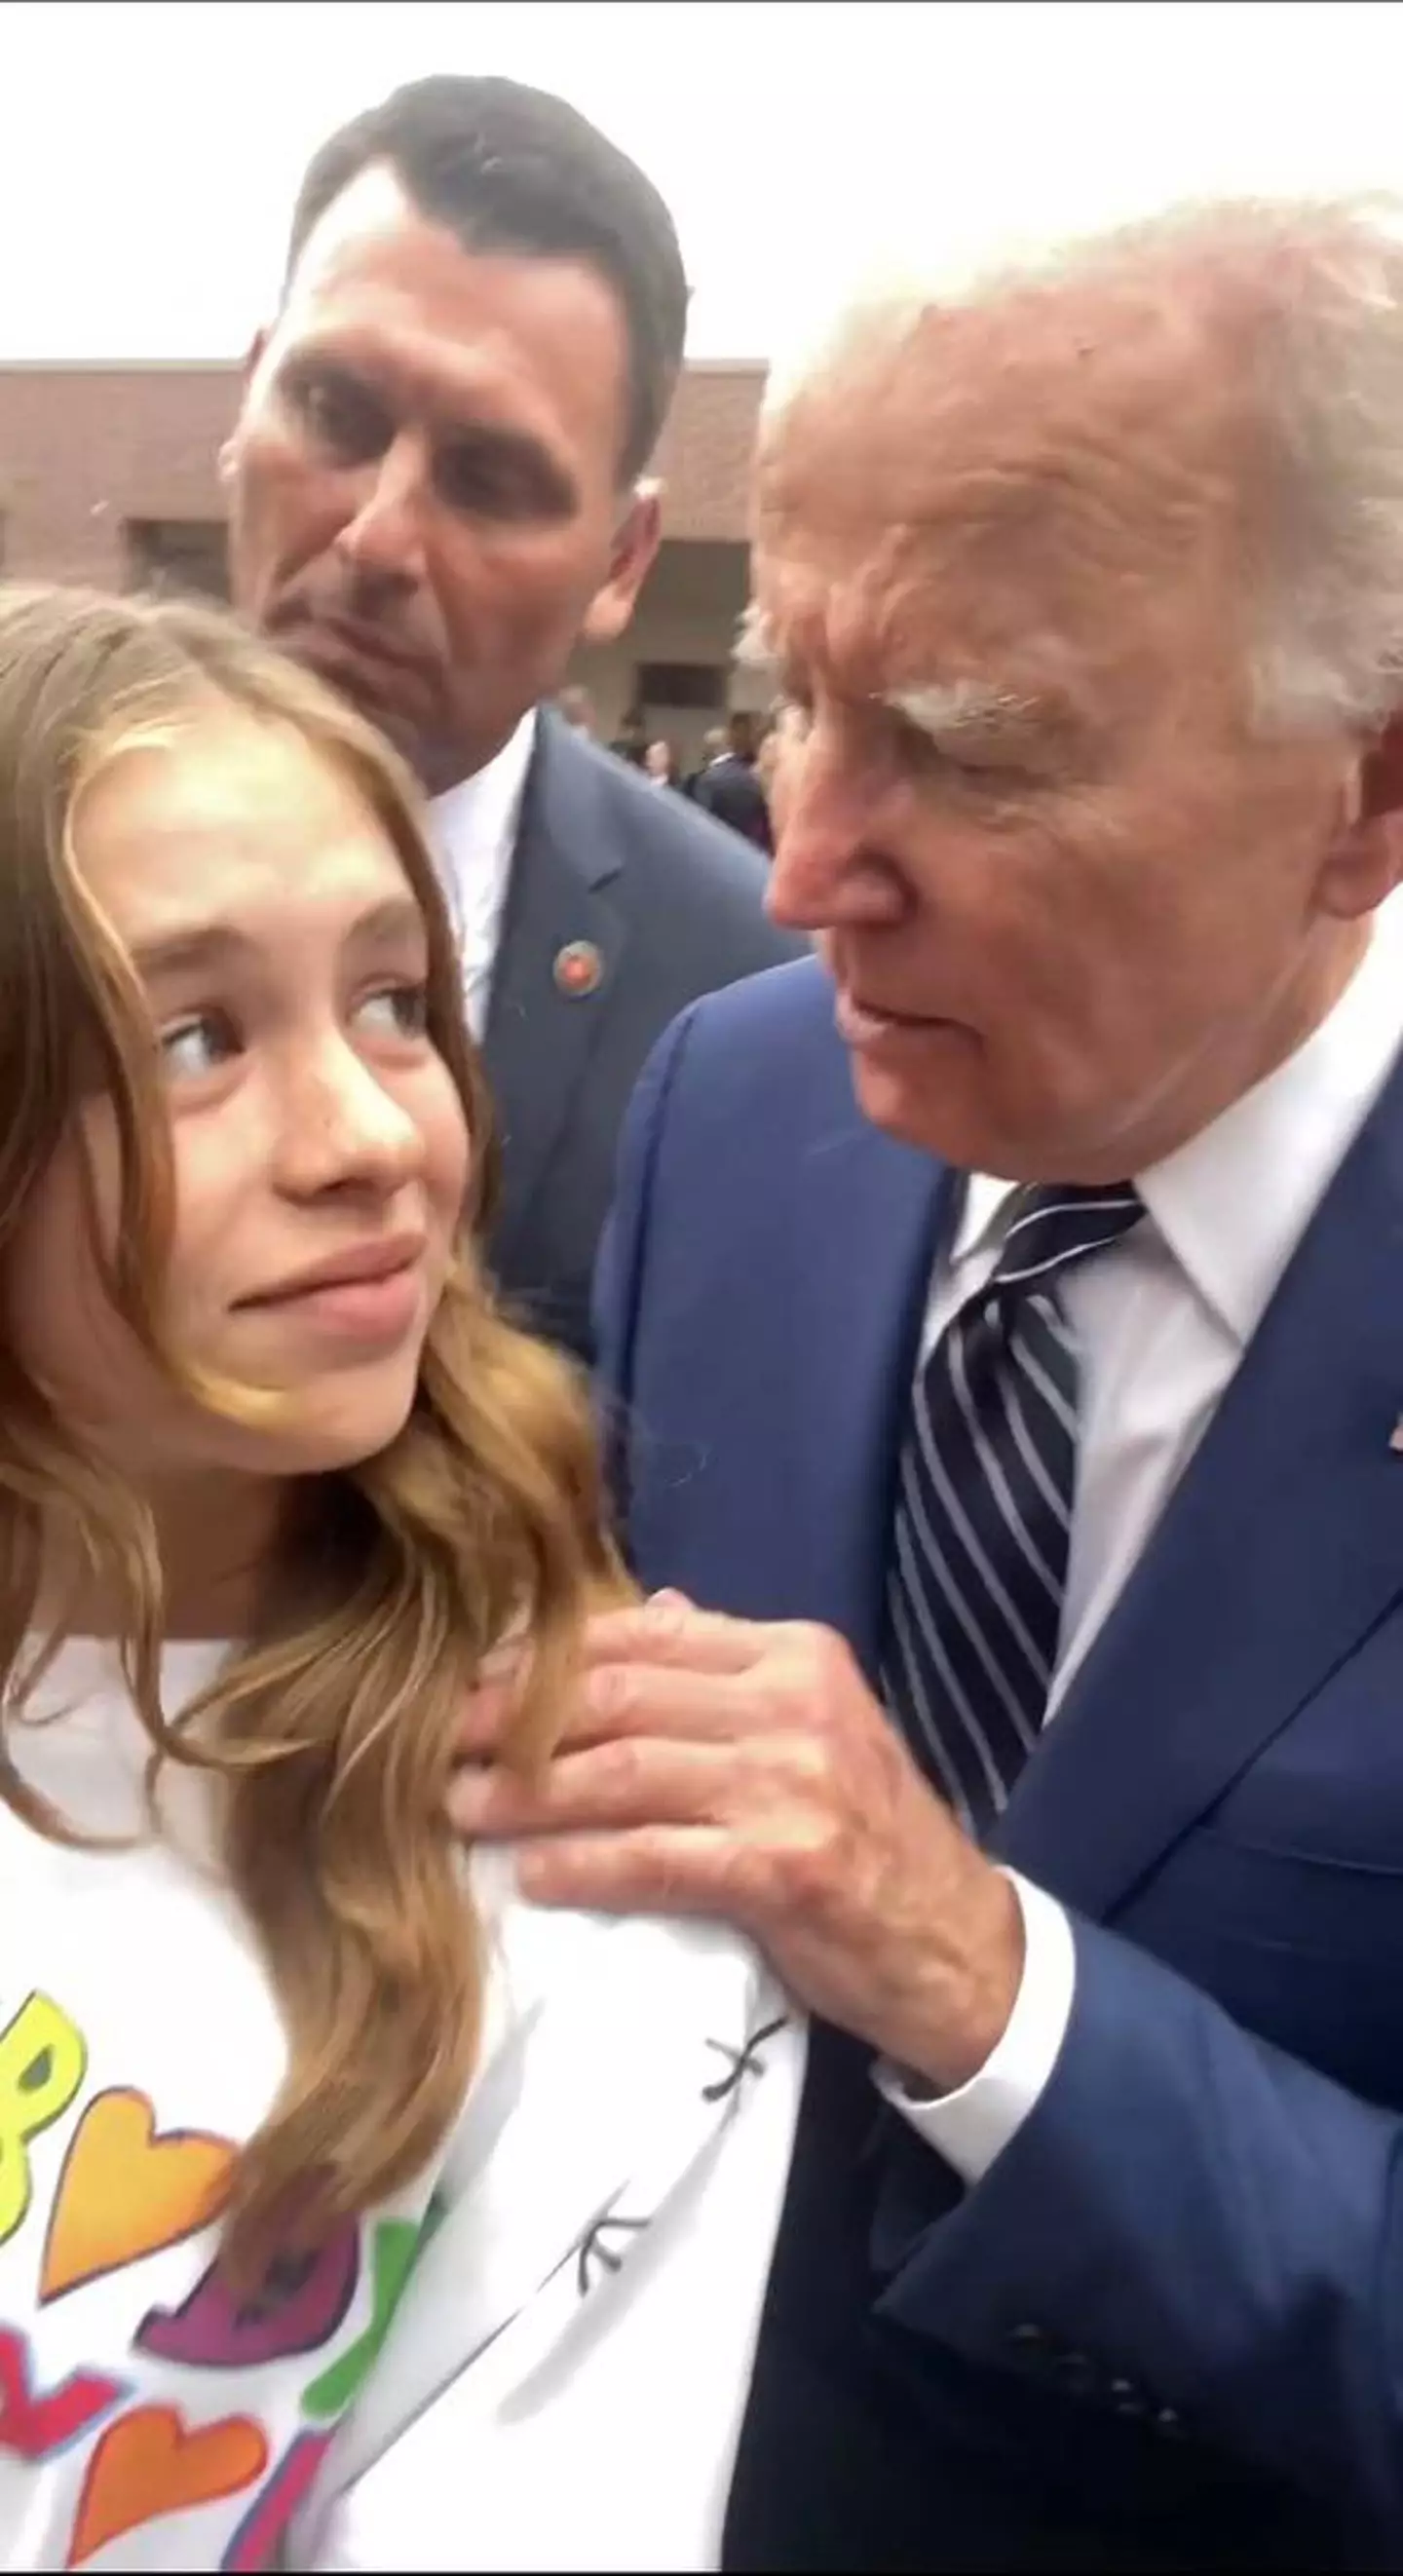 Joe Biden dished out some dating advice to a young girl recently.